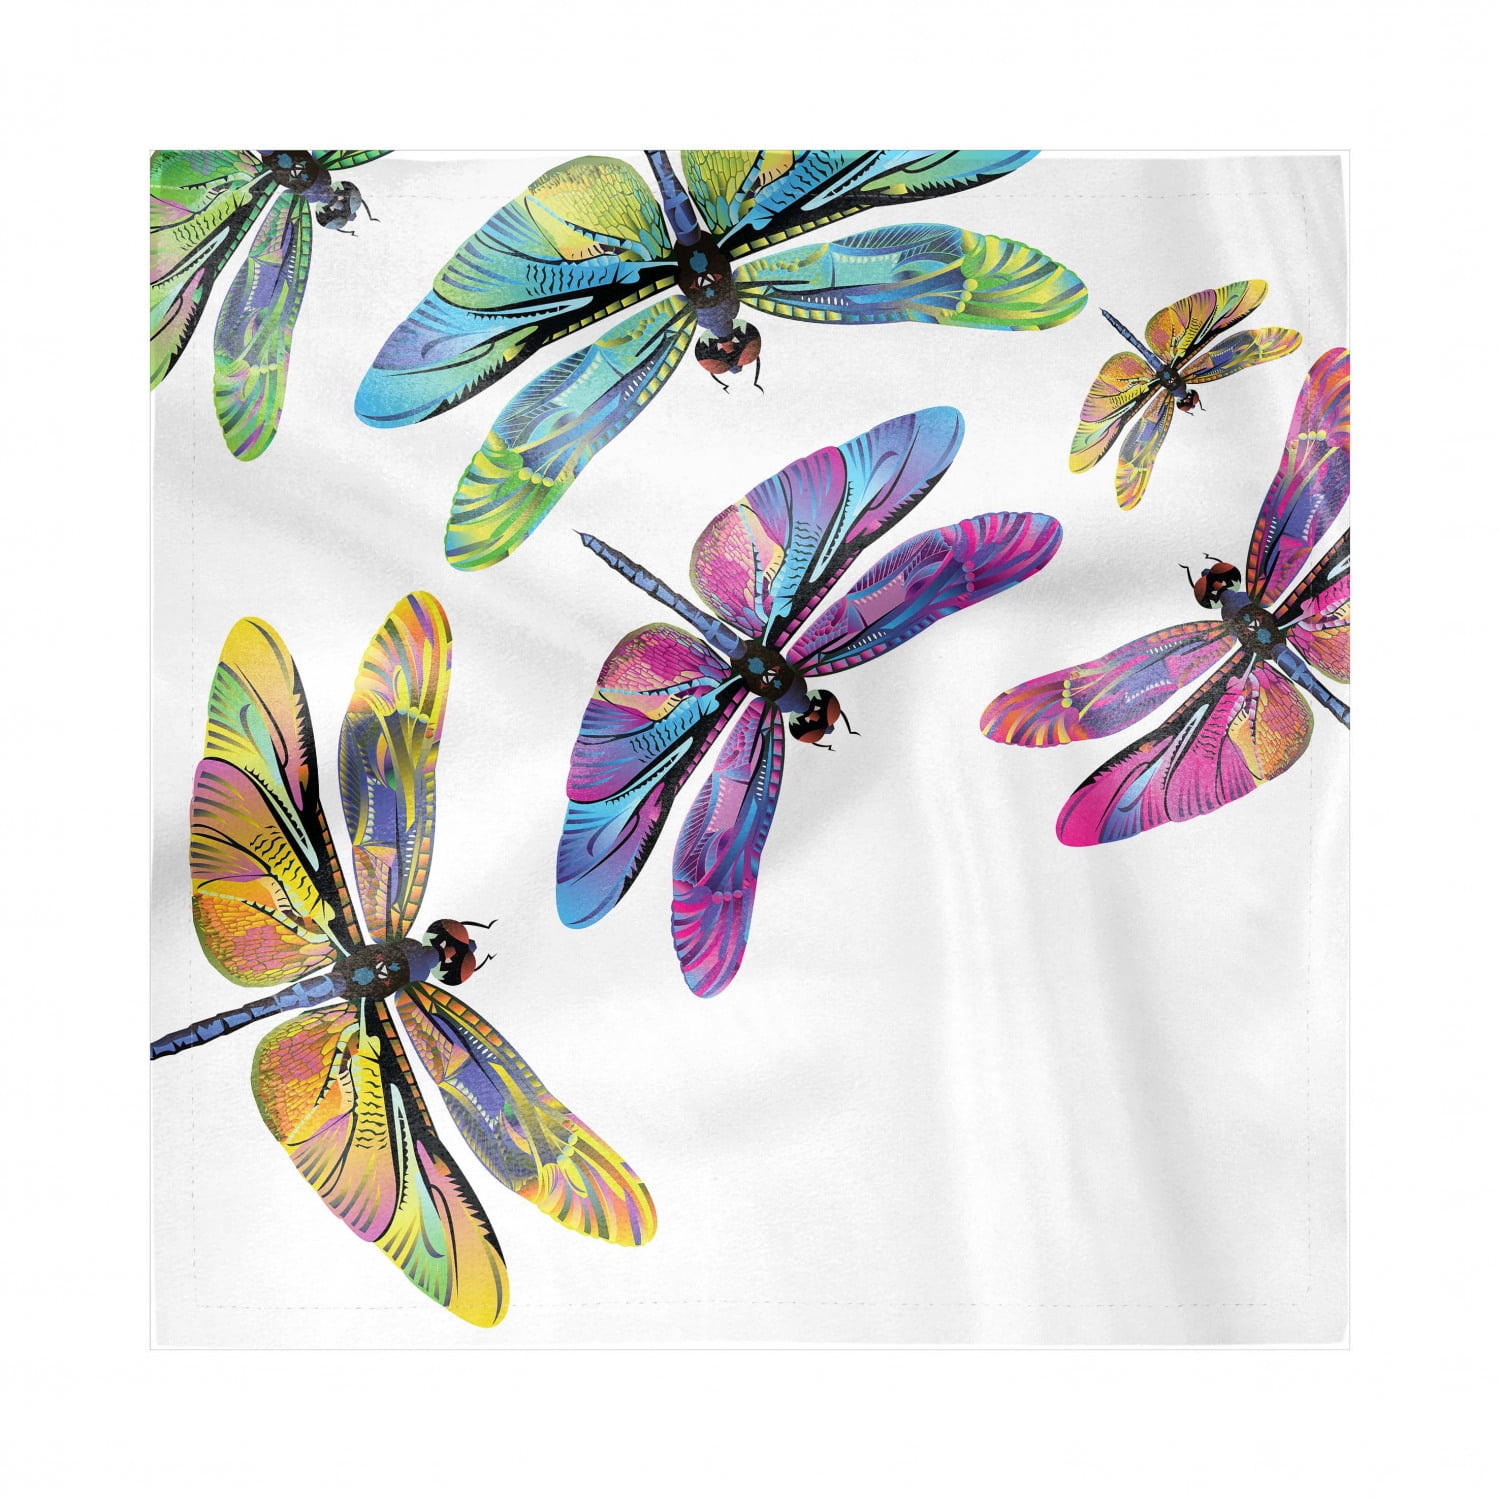 Washable Fabric Placemats for Dining Room Kitchen Table Decor Multicolor Ambesonne Dragonfly Place Mats Set of 4 Sixties Inspired Colorful Wings Spring Woodland Animals Pattern Wildlife Elements